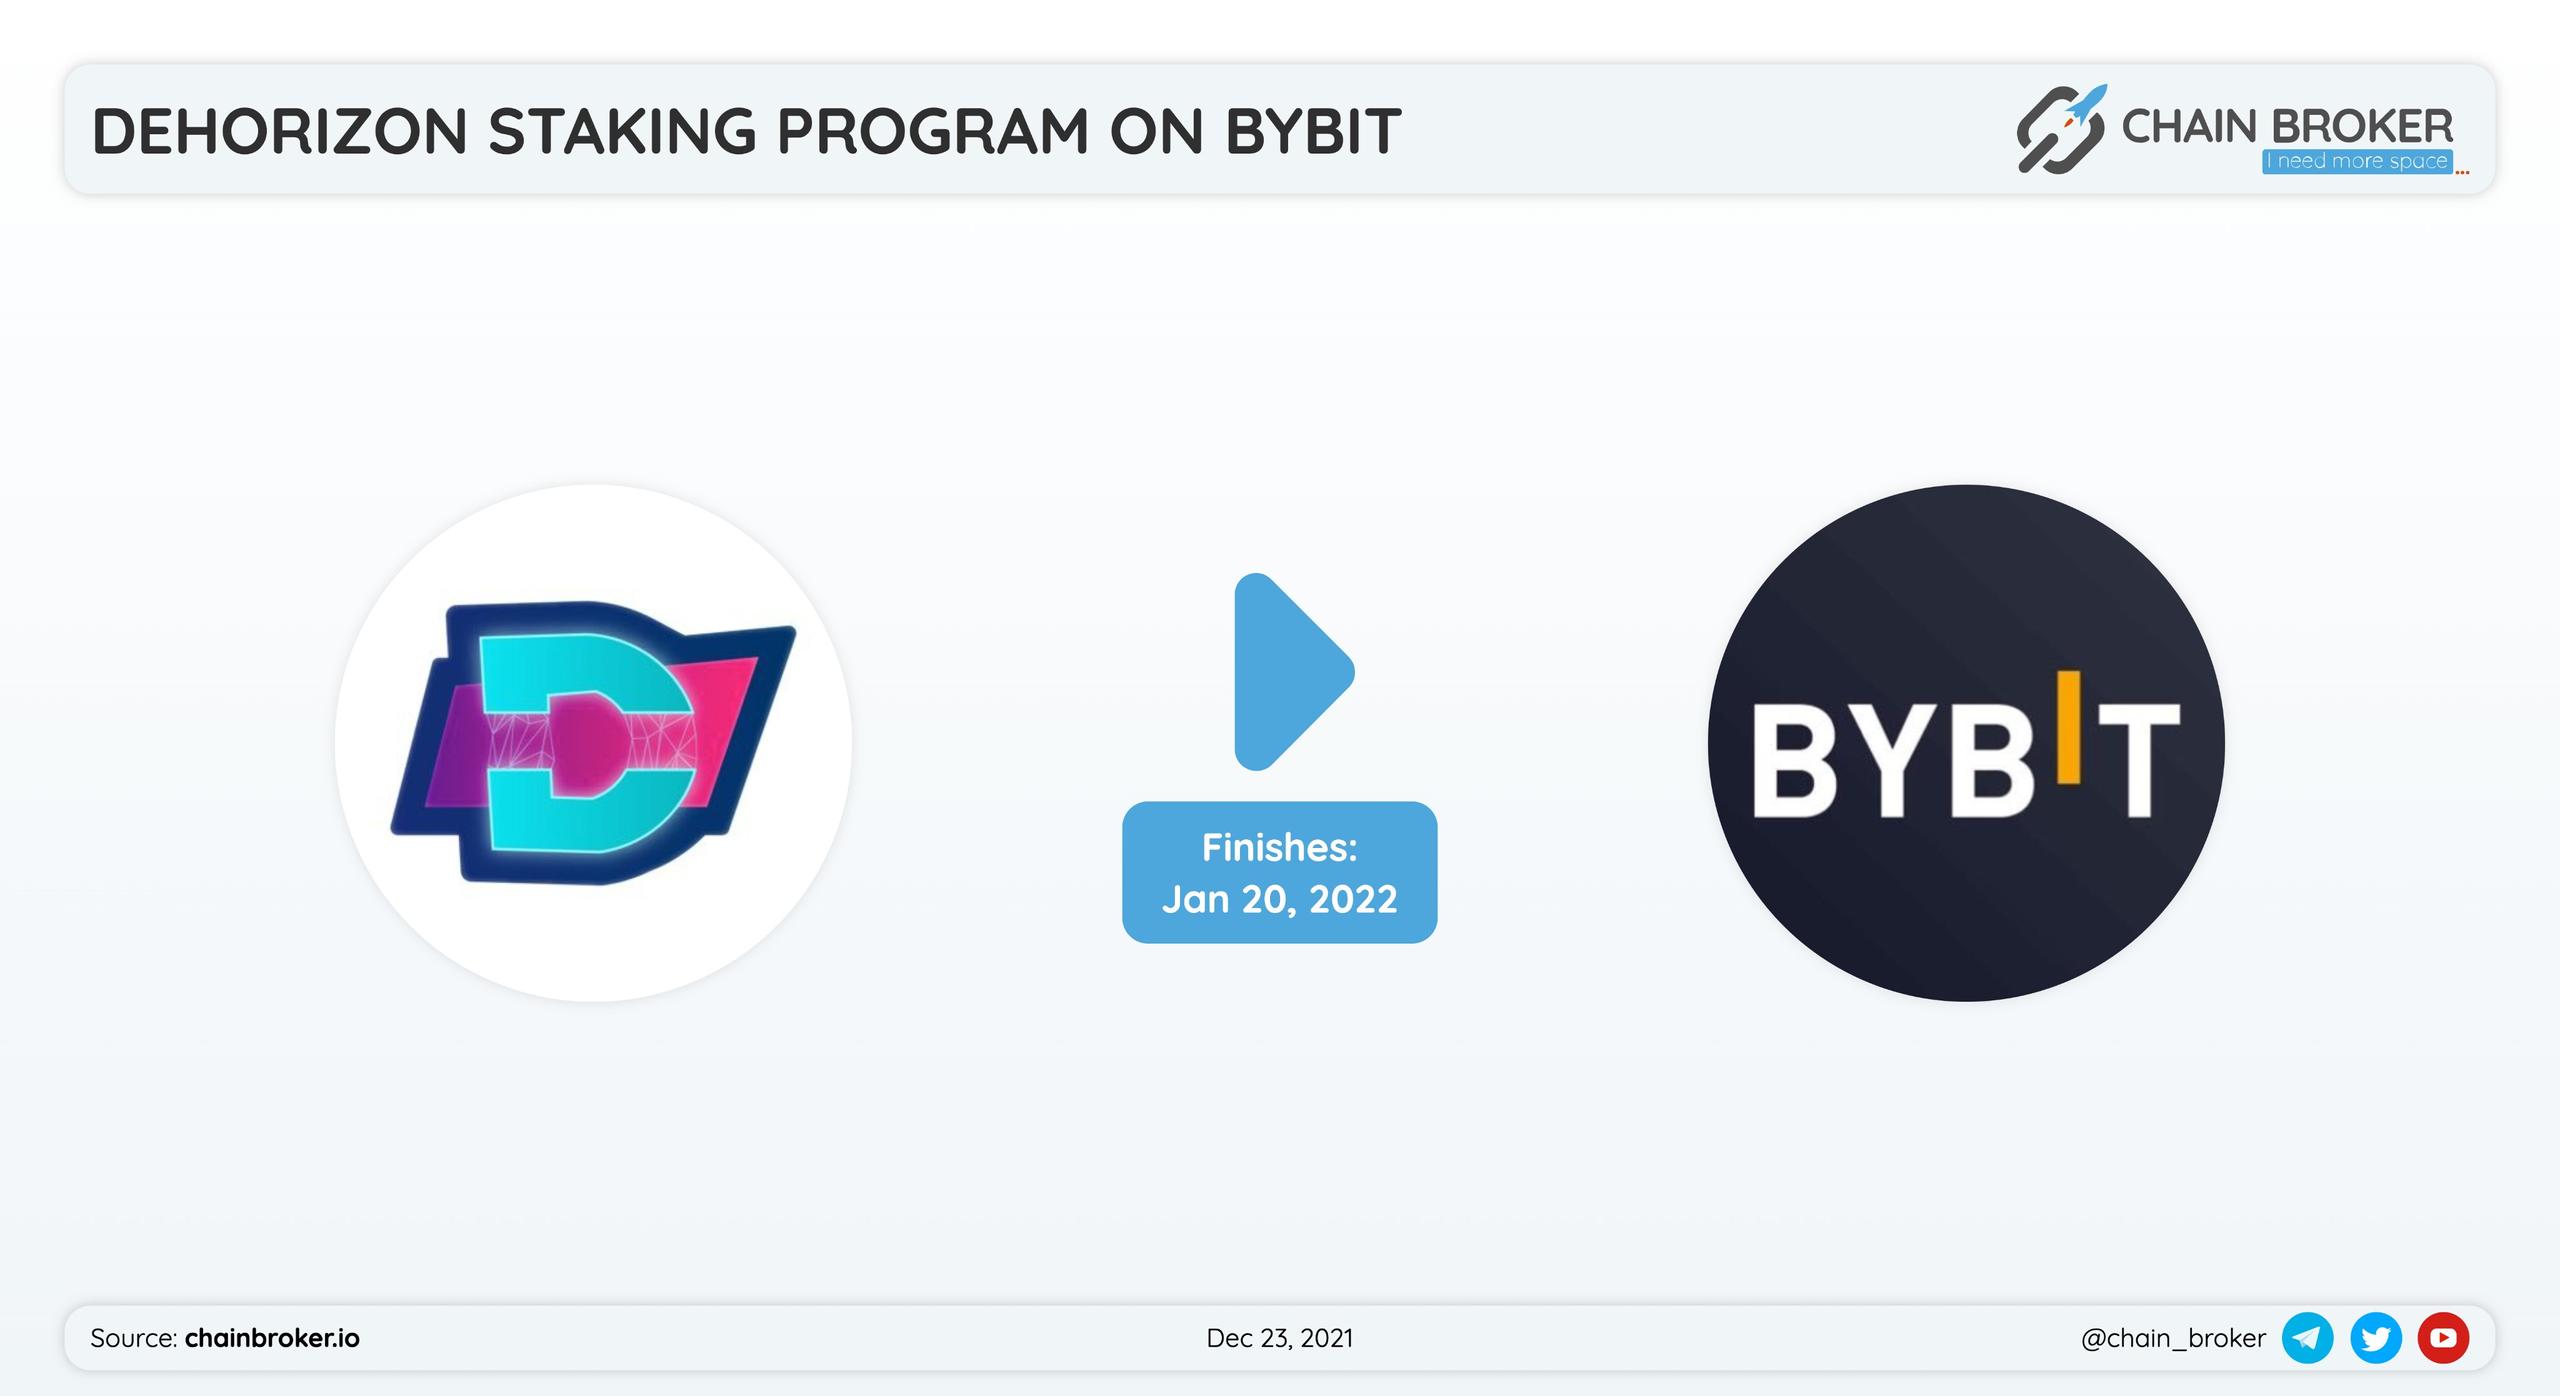 DeHorizon has announced a monthly staking program on Bybit.